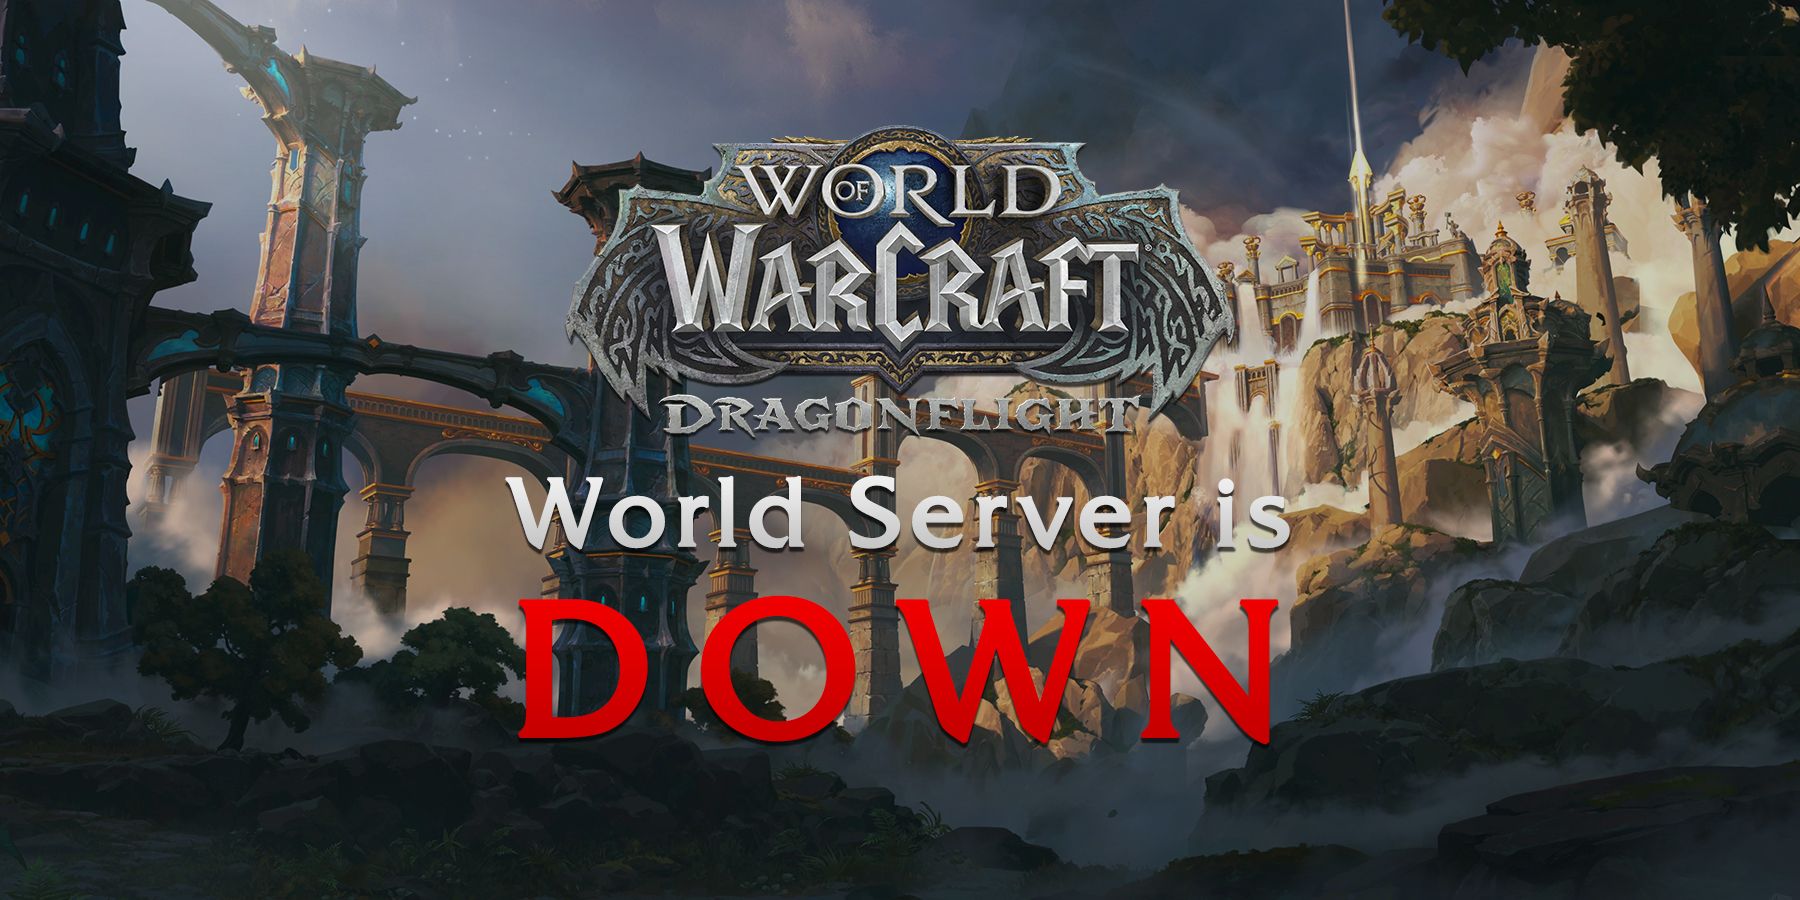 wow world of warcraft dragonflight world server down launch issues boat zeppelin transportation dragon isles